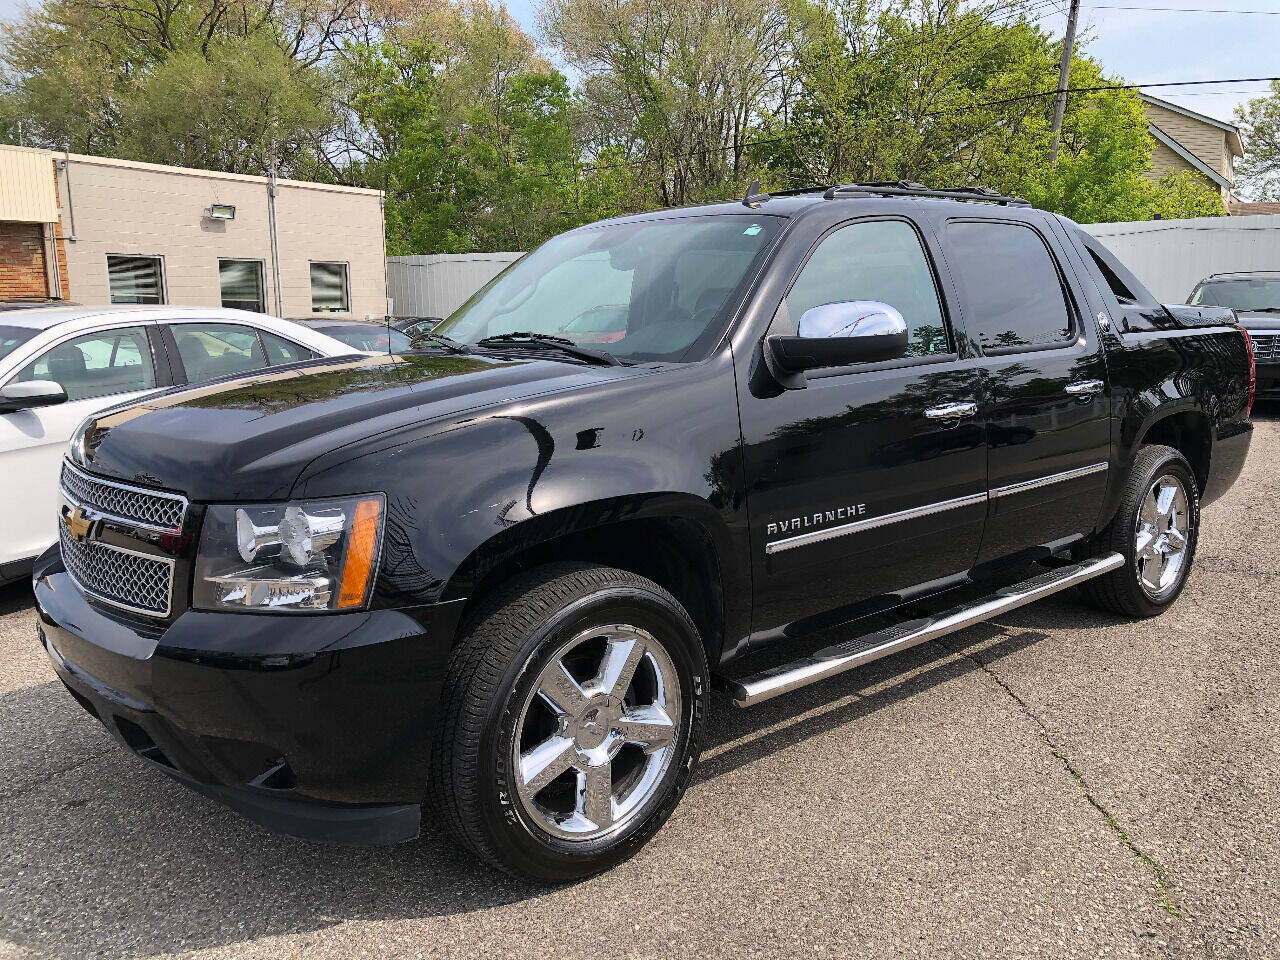 Used 2013 Chevrolet Avalanche For Sale